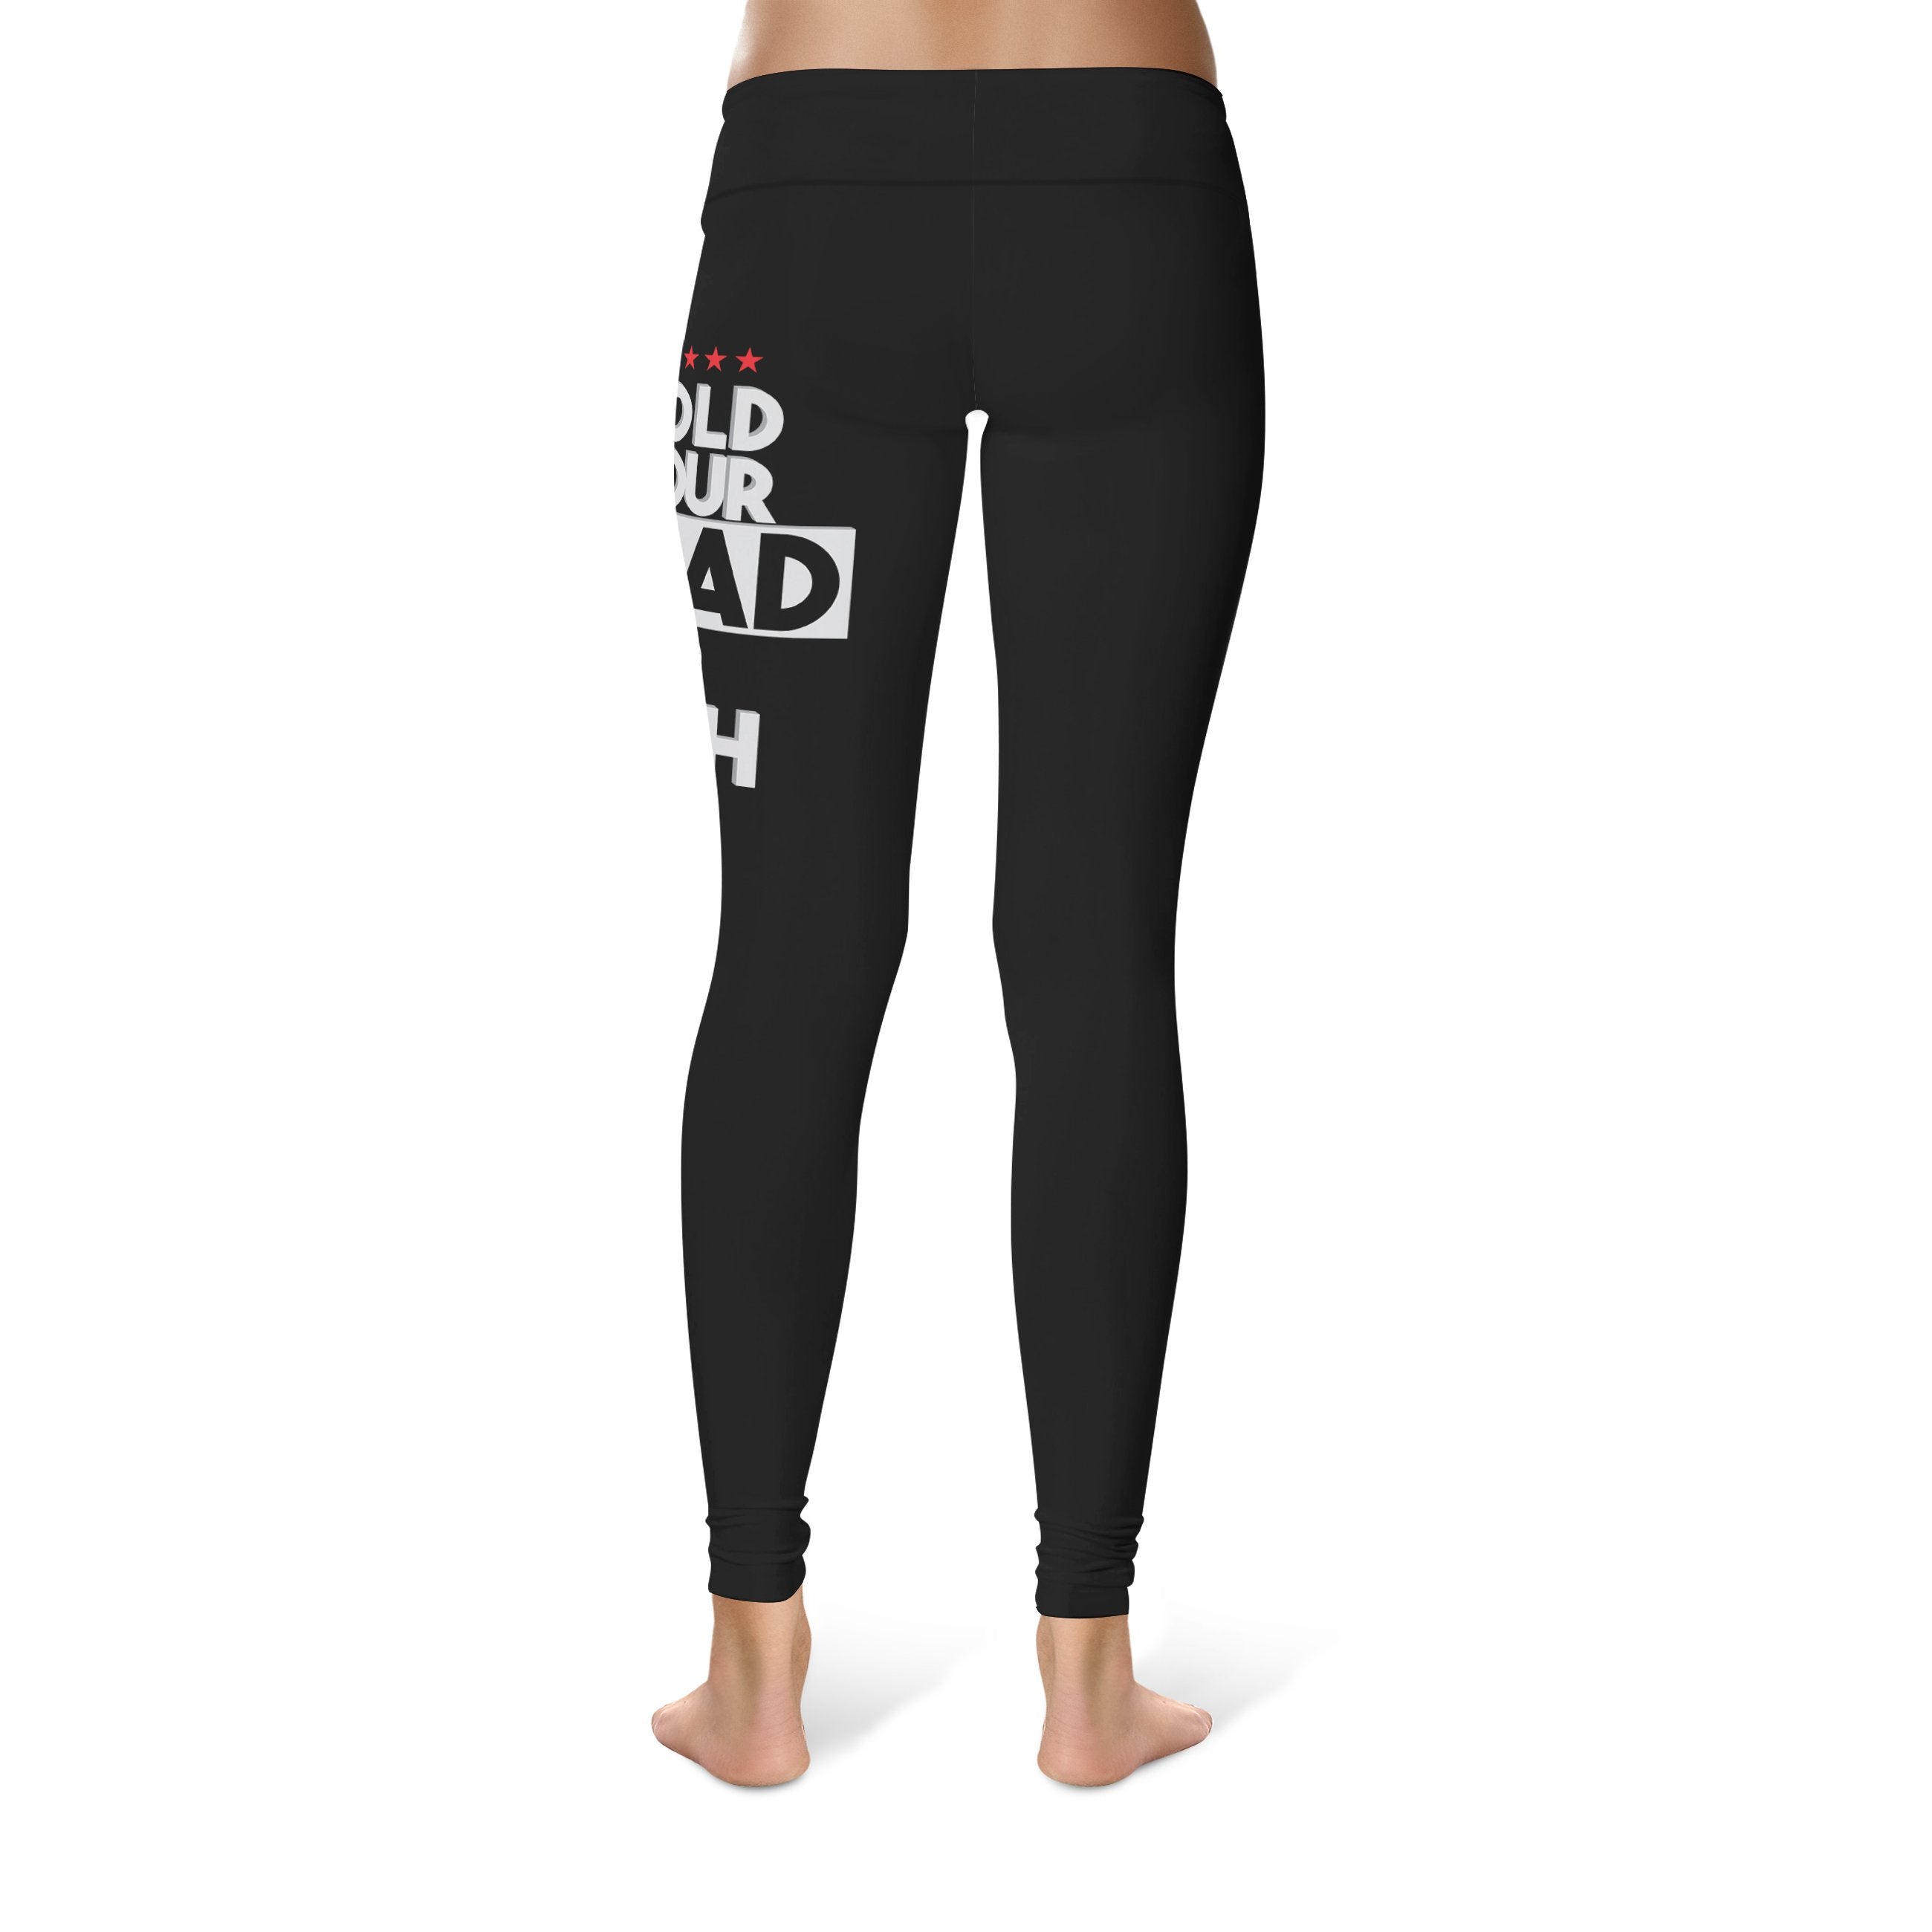 Hold your head up high - Liverpool Leggings – YouStatement - Leggings ...